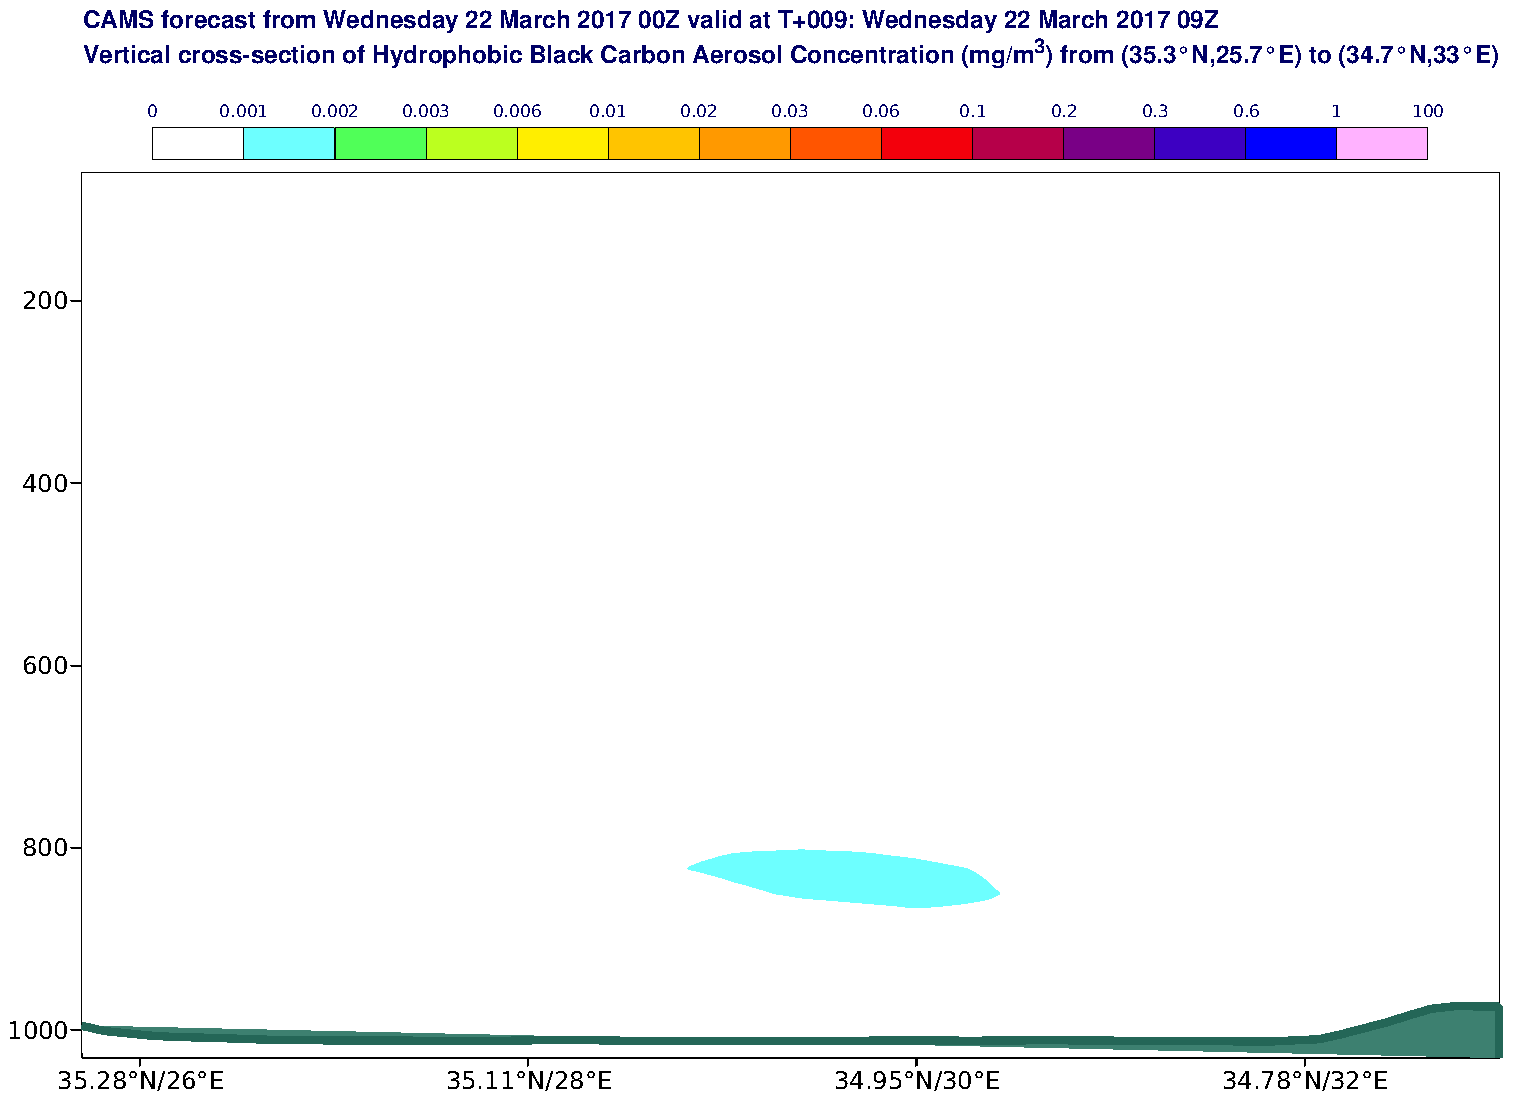 Vertical cross-section of Hydrophobic Black Carbon Aerosol Concentration (mg/m3) valid at T9 - 2017-03-22 09:00